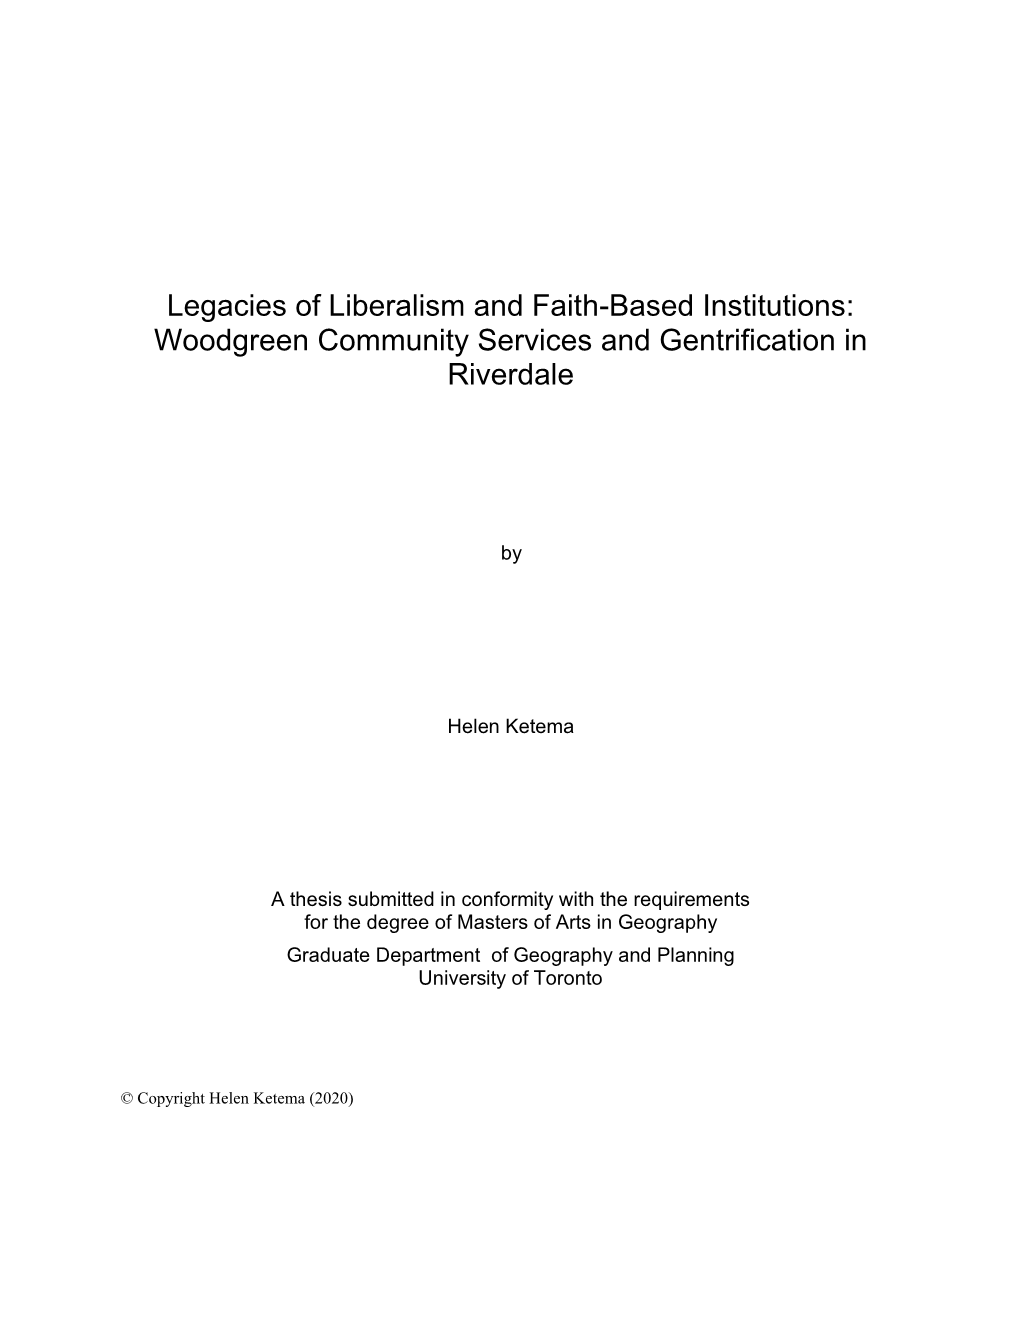 Woodgreen Community Services and Gentrification in Riverdale